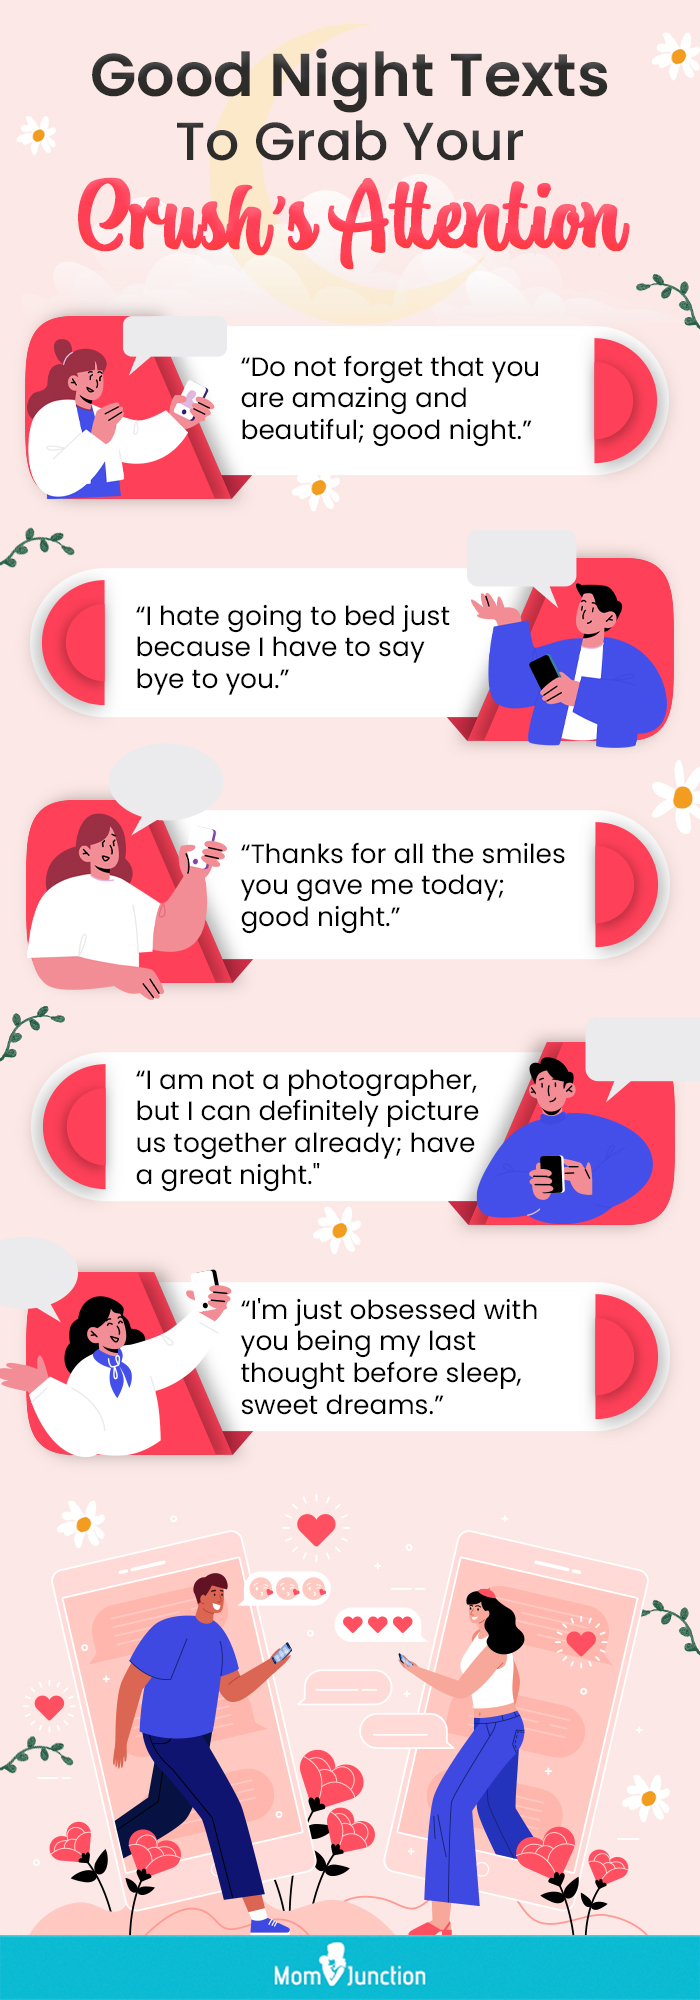 best friend quotes between boy and girl tagalog